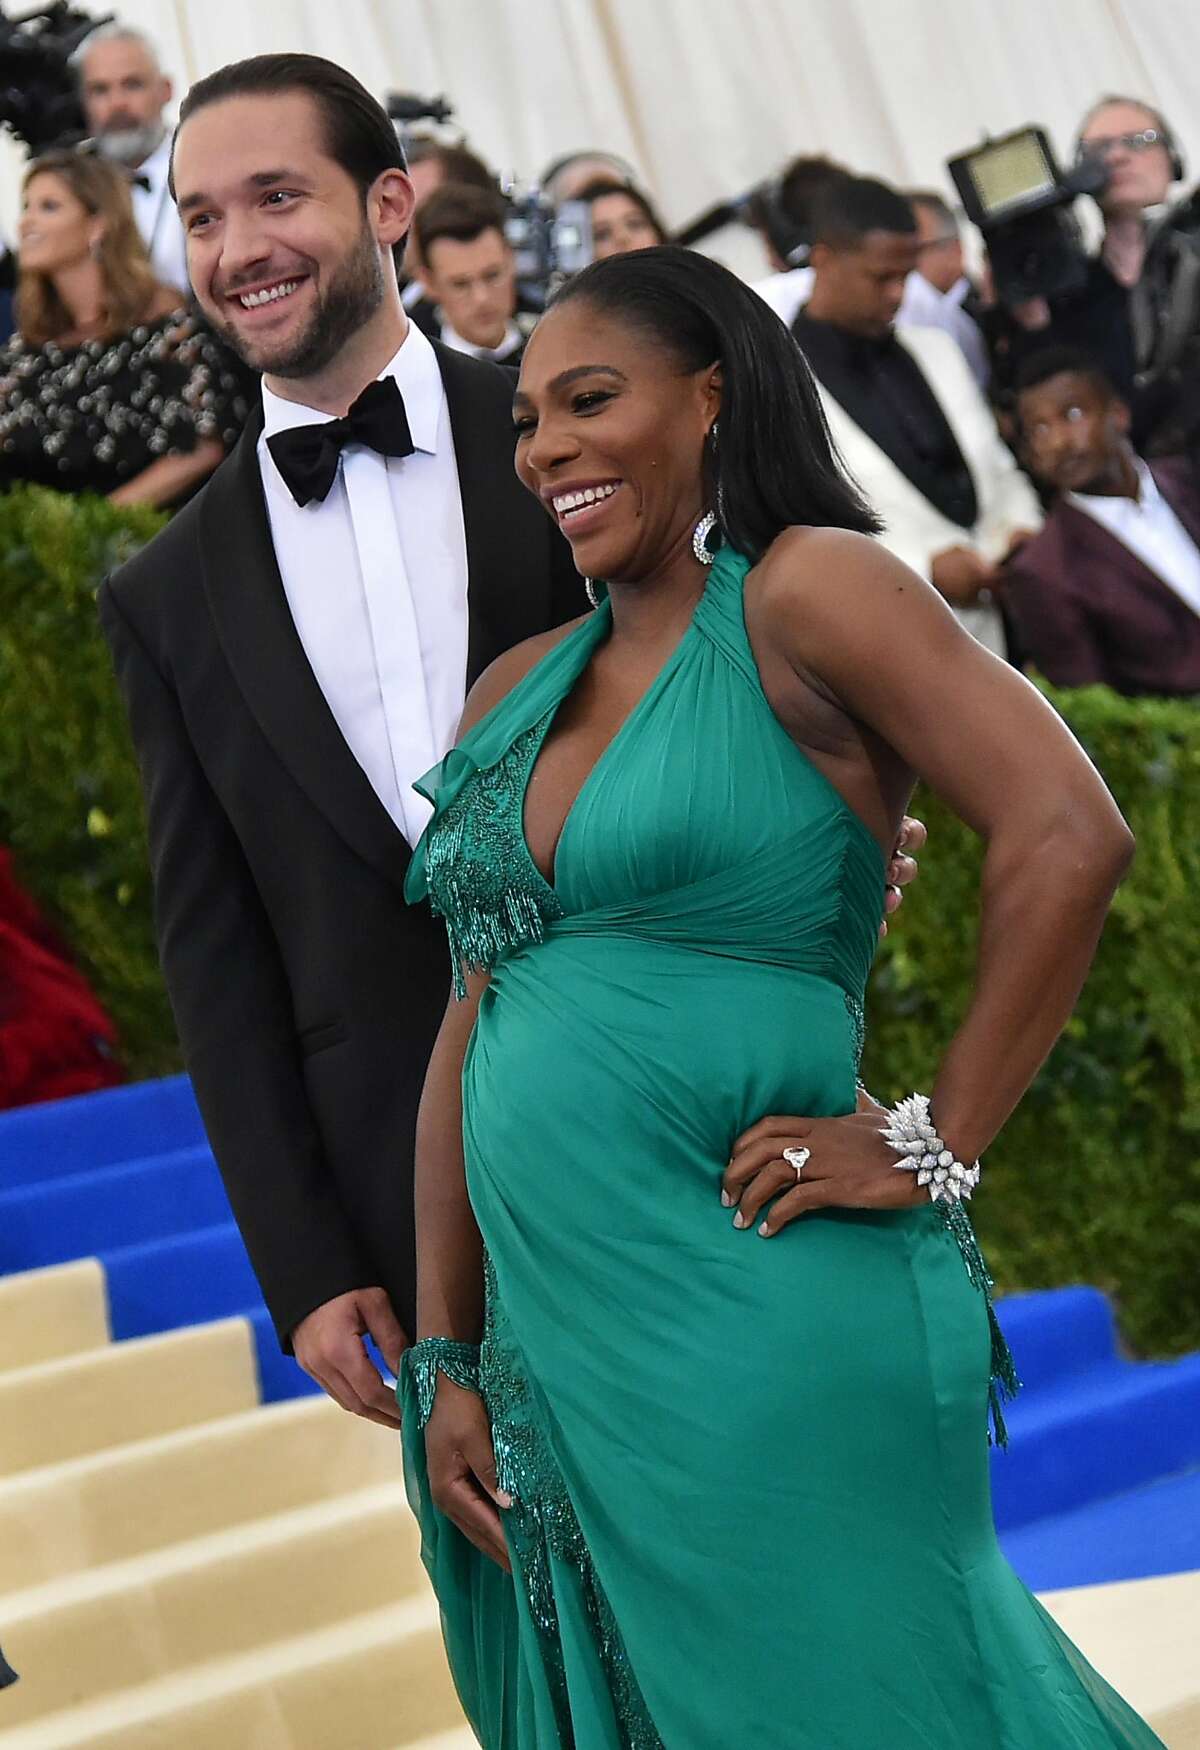 The latest couple to join the ranks of Bay Area power couple royalty: Alexis Ohanian and Serena Williams. Williams, the tennis great, needs no introduction. Her husband Ohanian is the co-founder of Reddit. The couple welcomed their first child, Alexis Olympia, in 2017. 